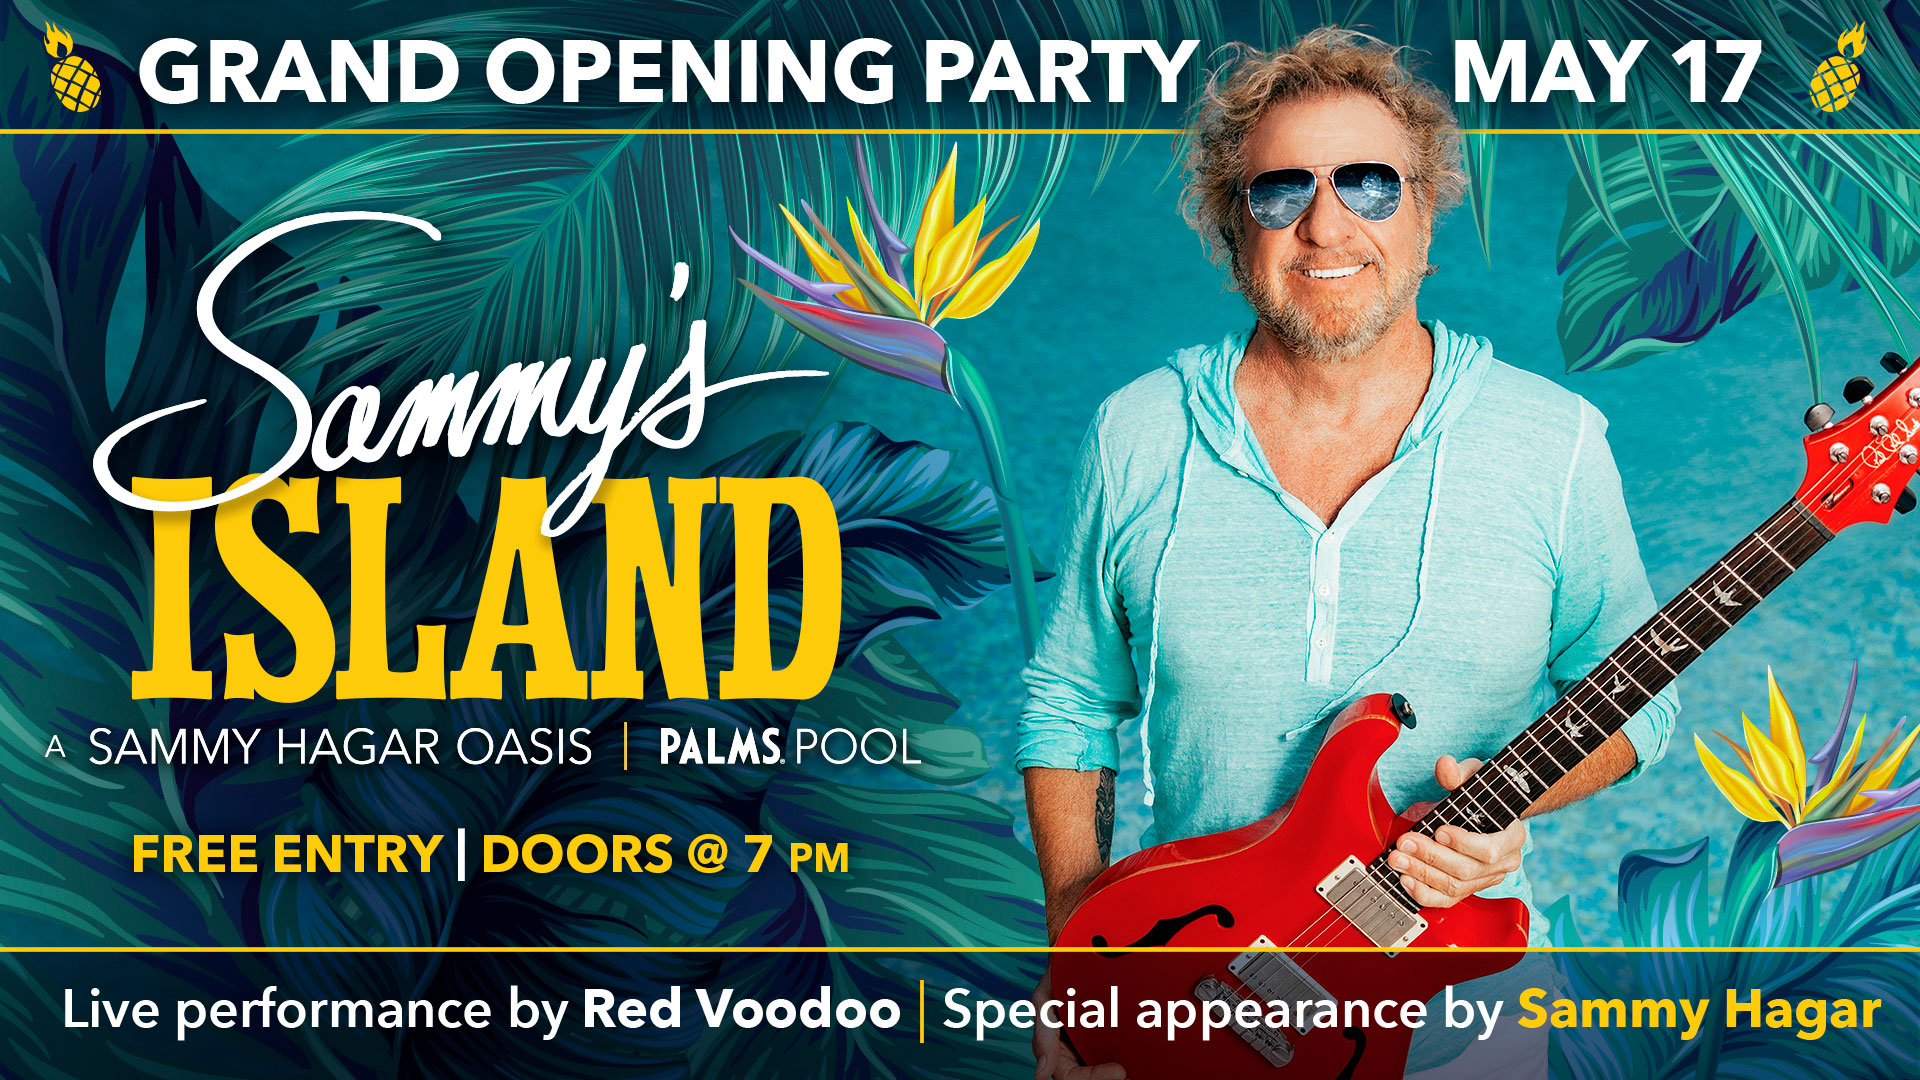 Sammy's Island, Grand Opening Party, May 17th